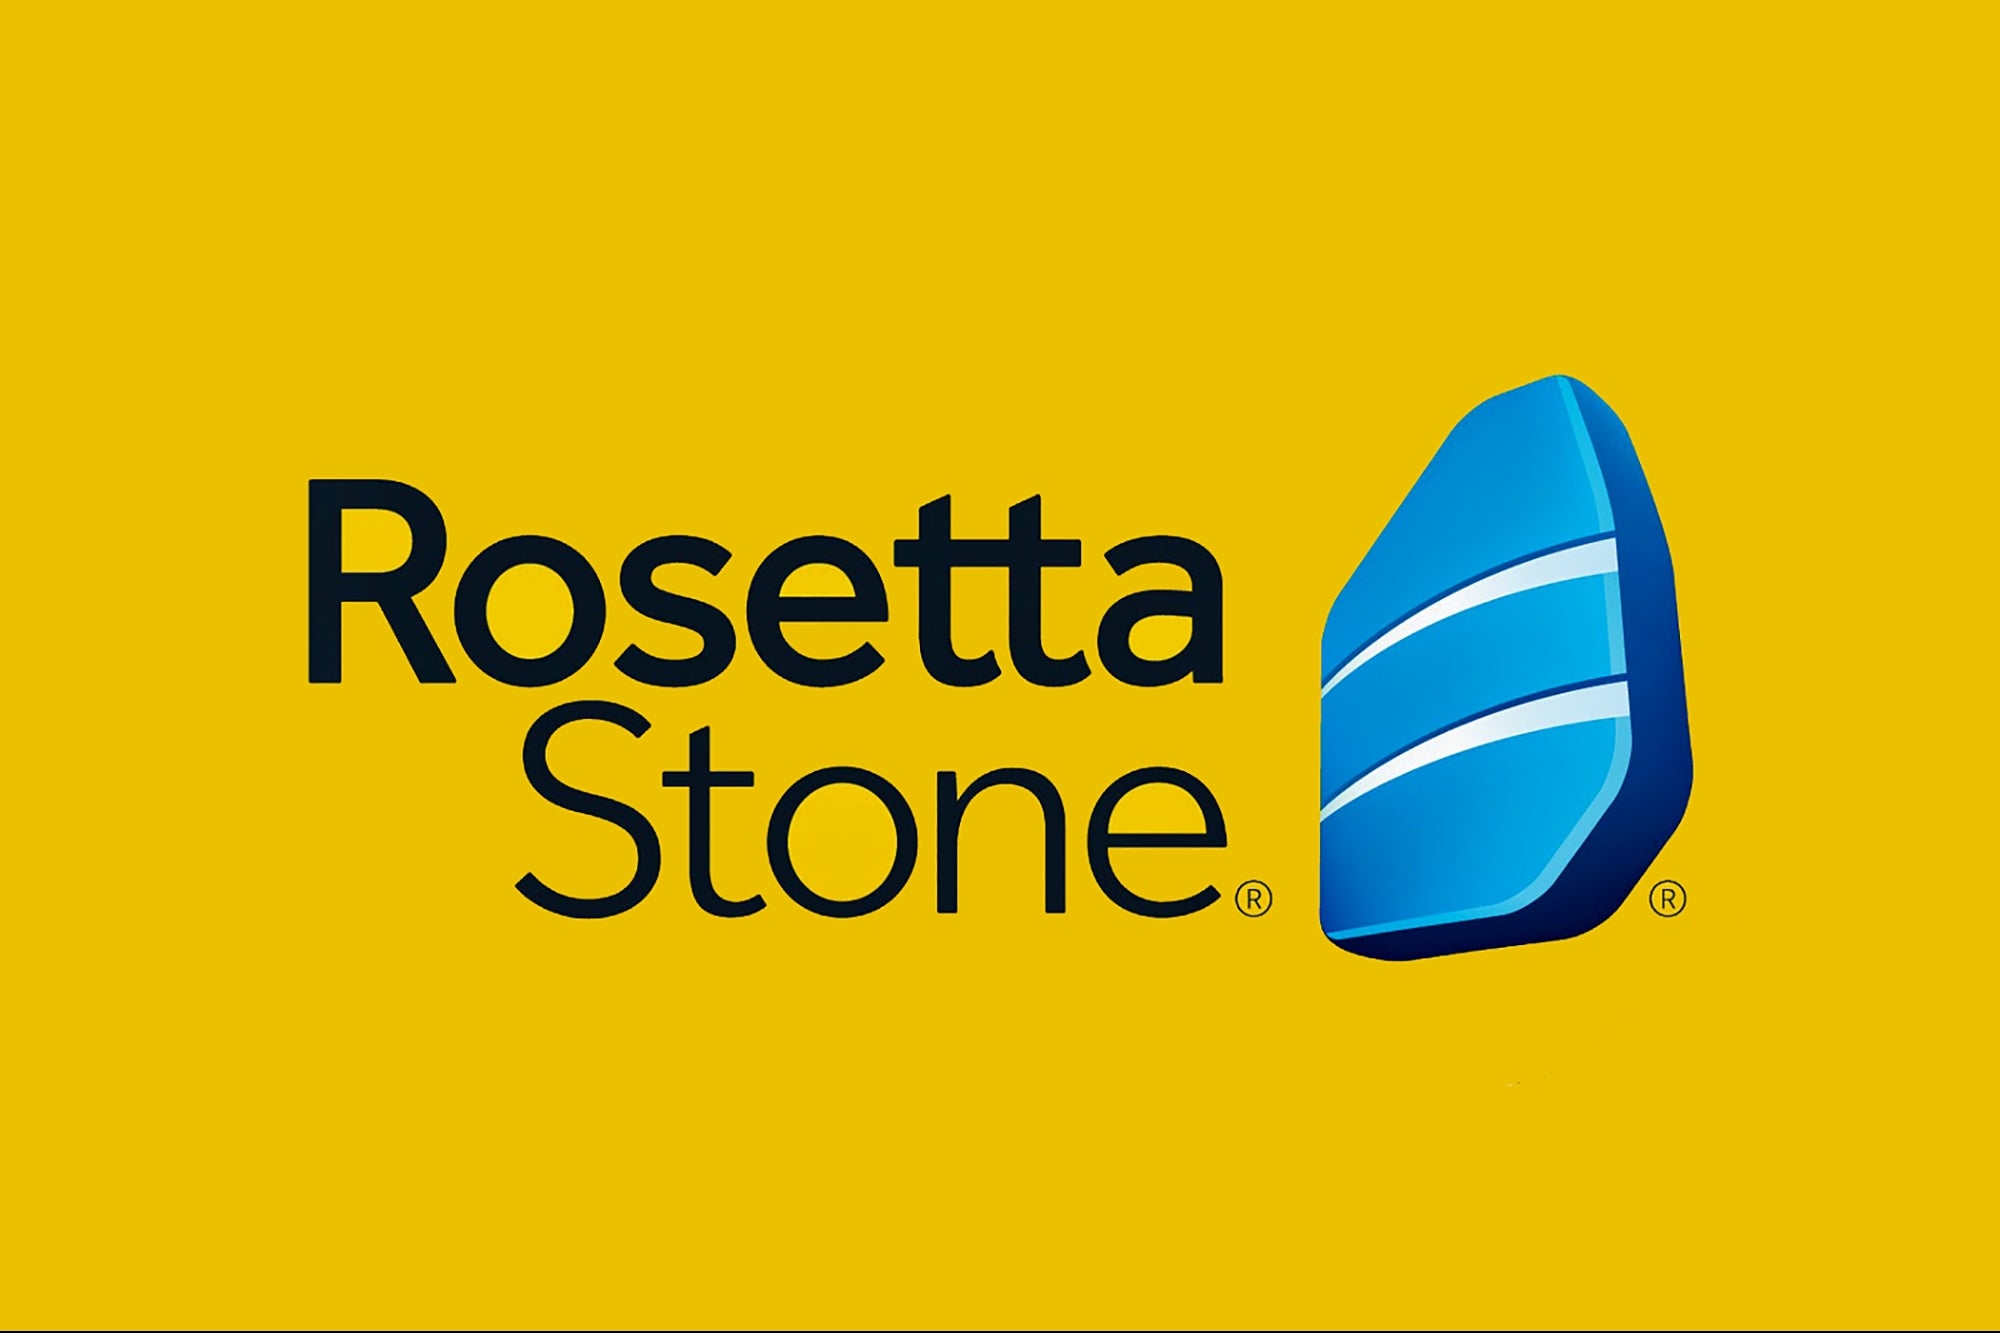 Rosetta Stone Became In Distress. That is How I Found the Company’s Competitive Income